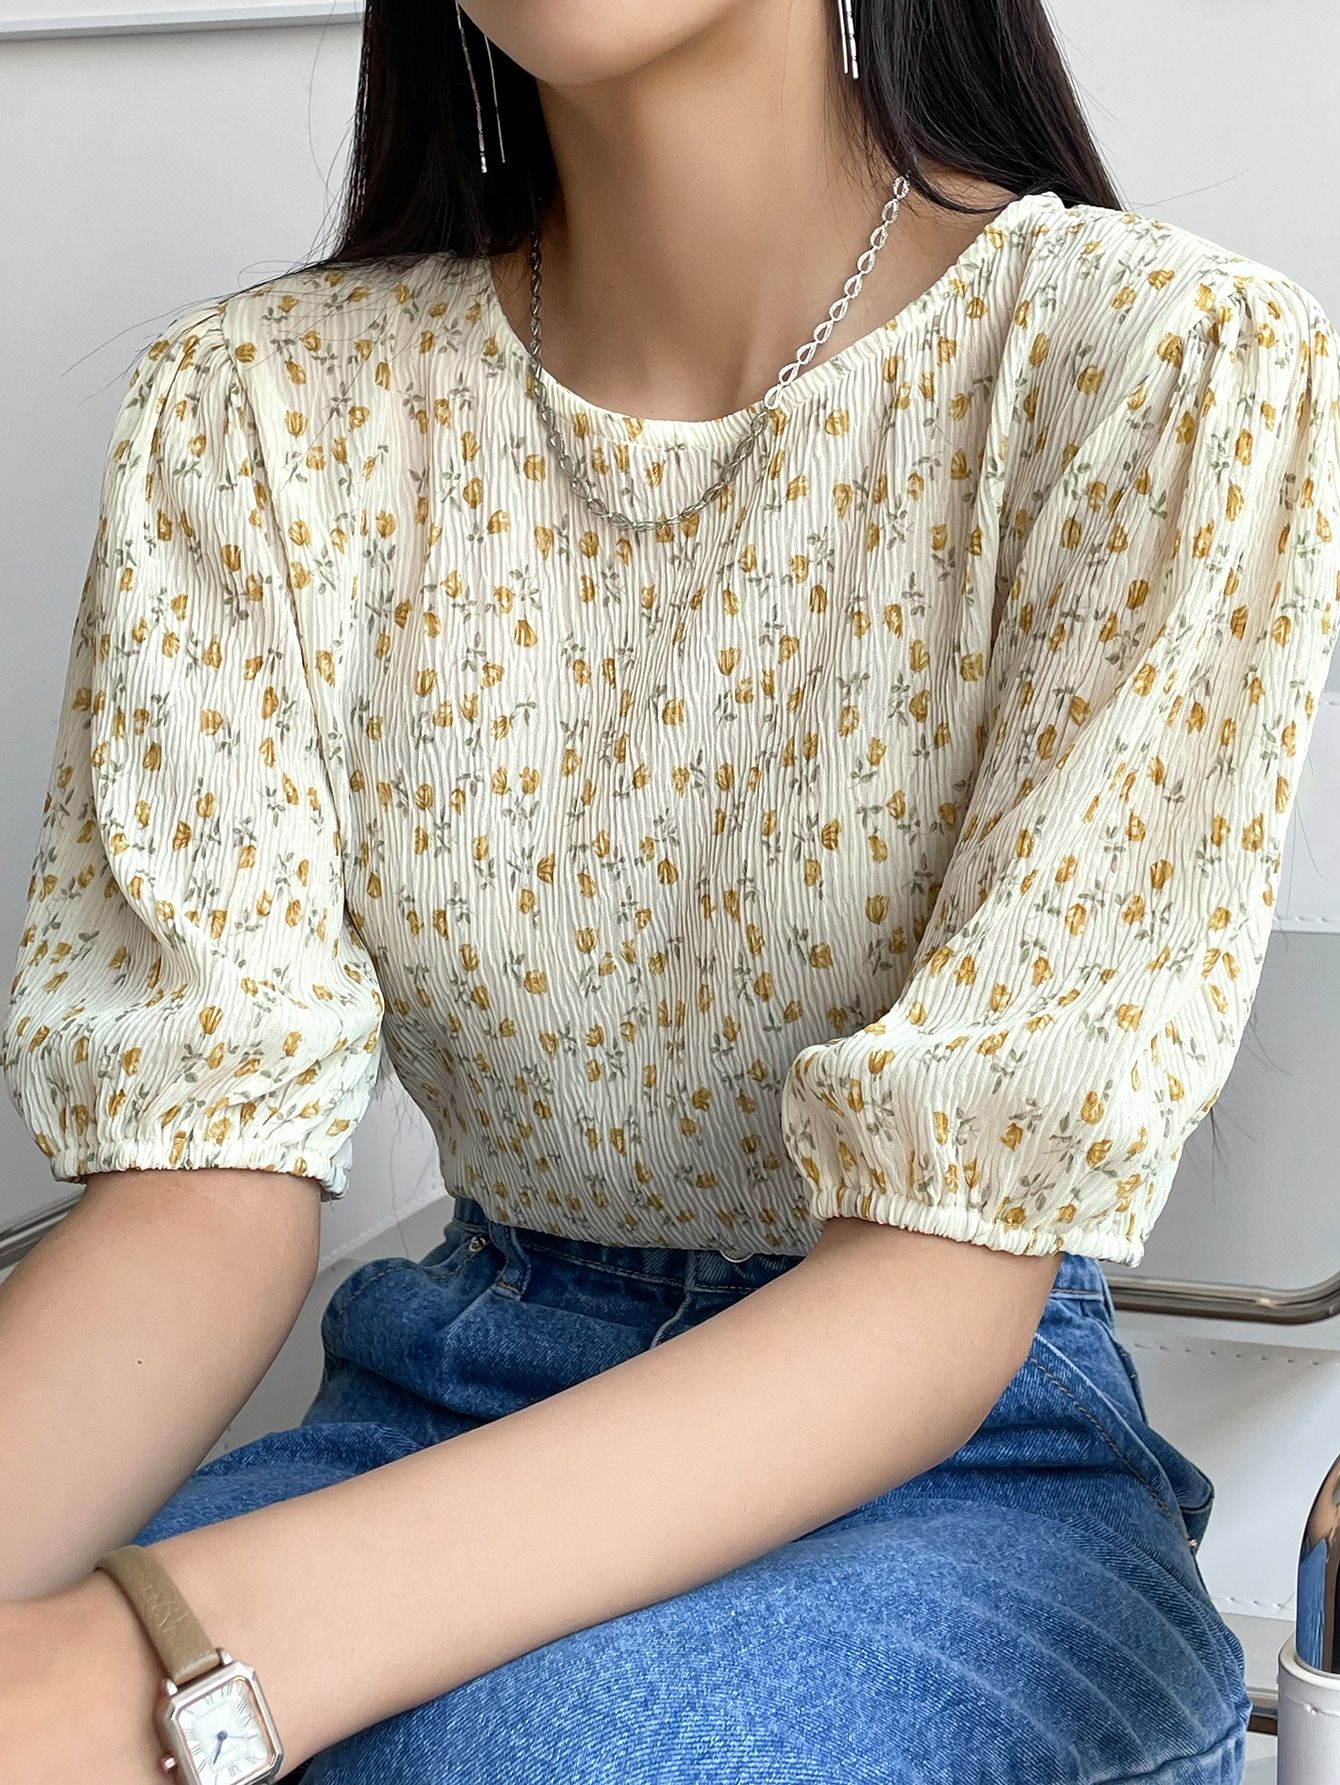 Stay Chic and Feminine with Floral Blouse Designs